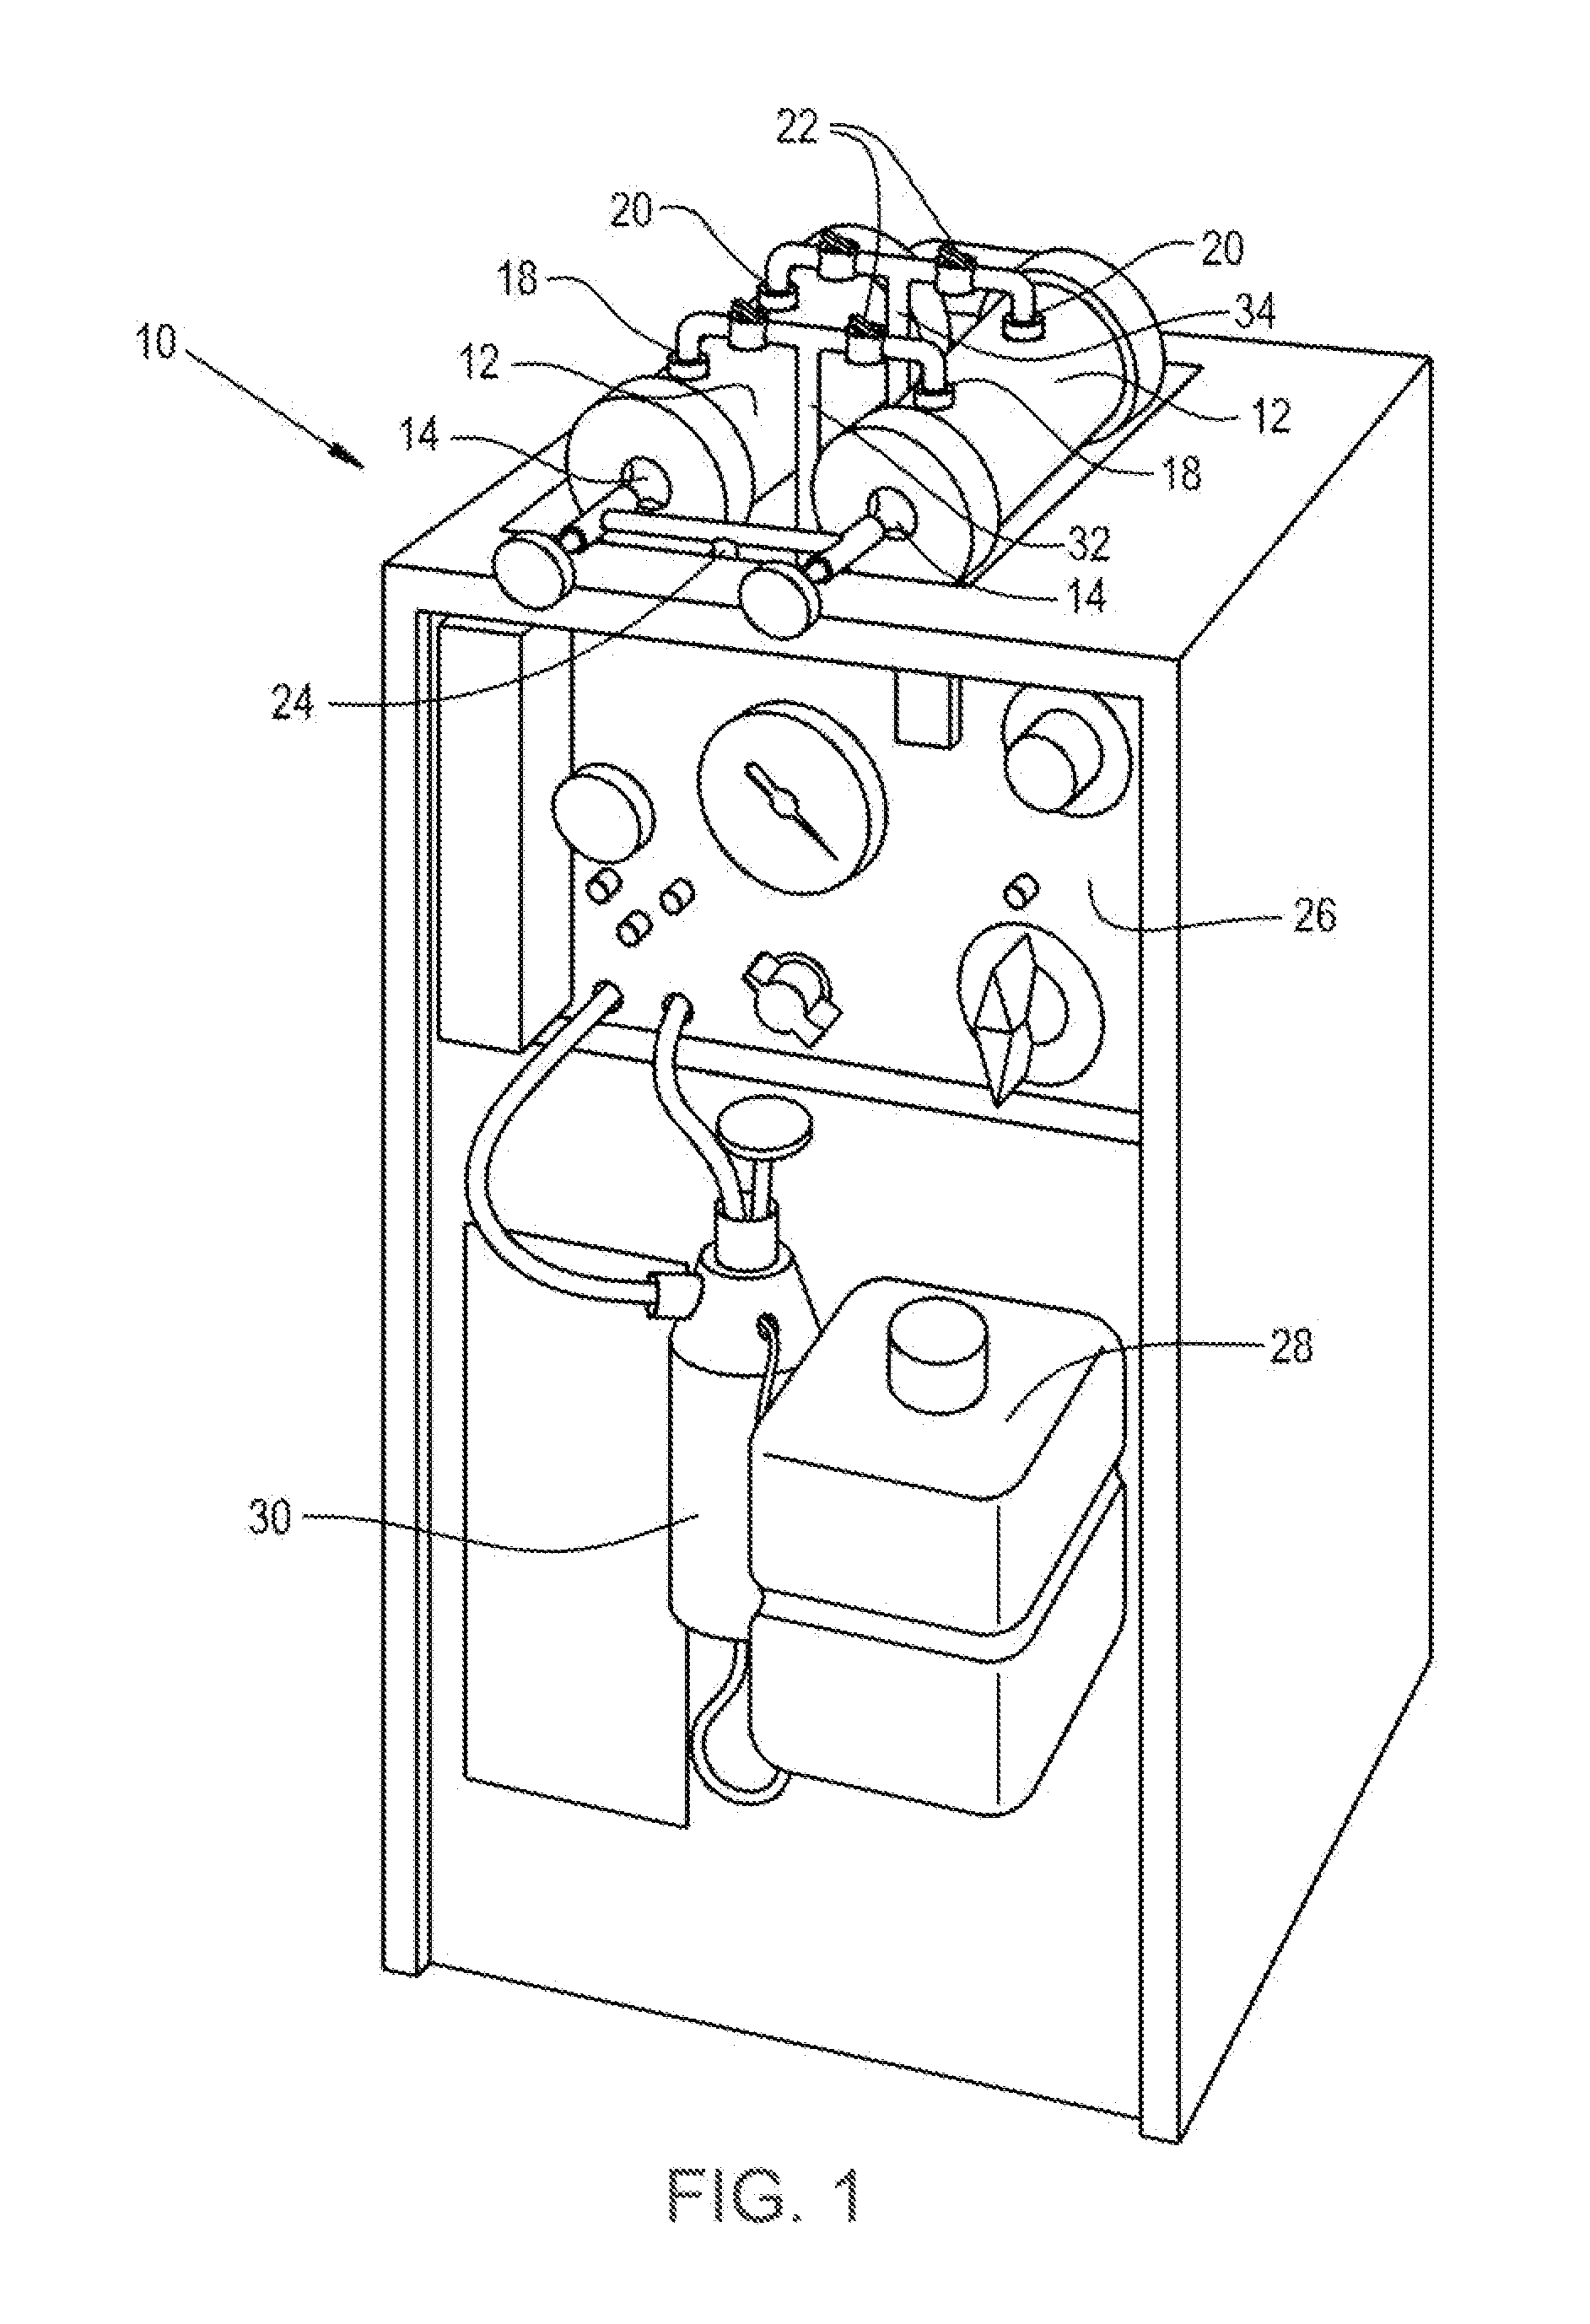 Personal airway humidification and oxygen-enrichment apparatus and method